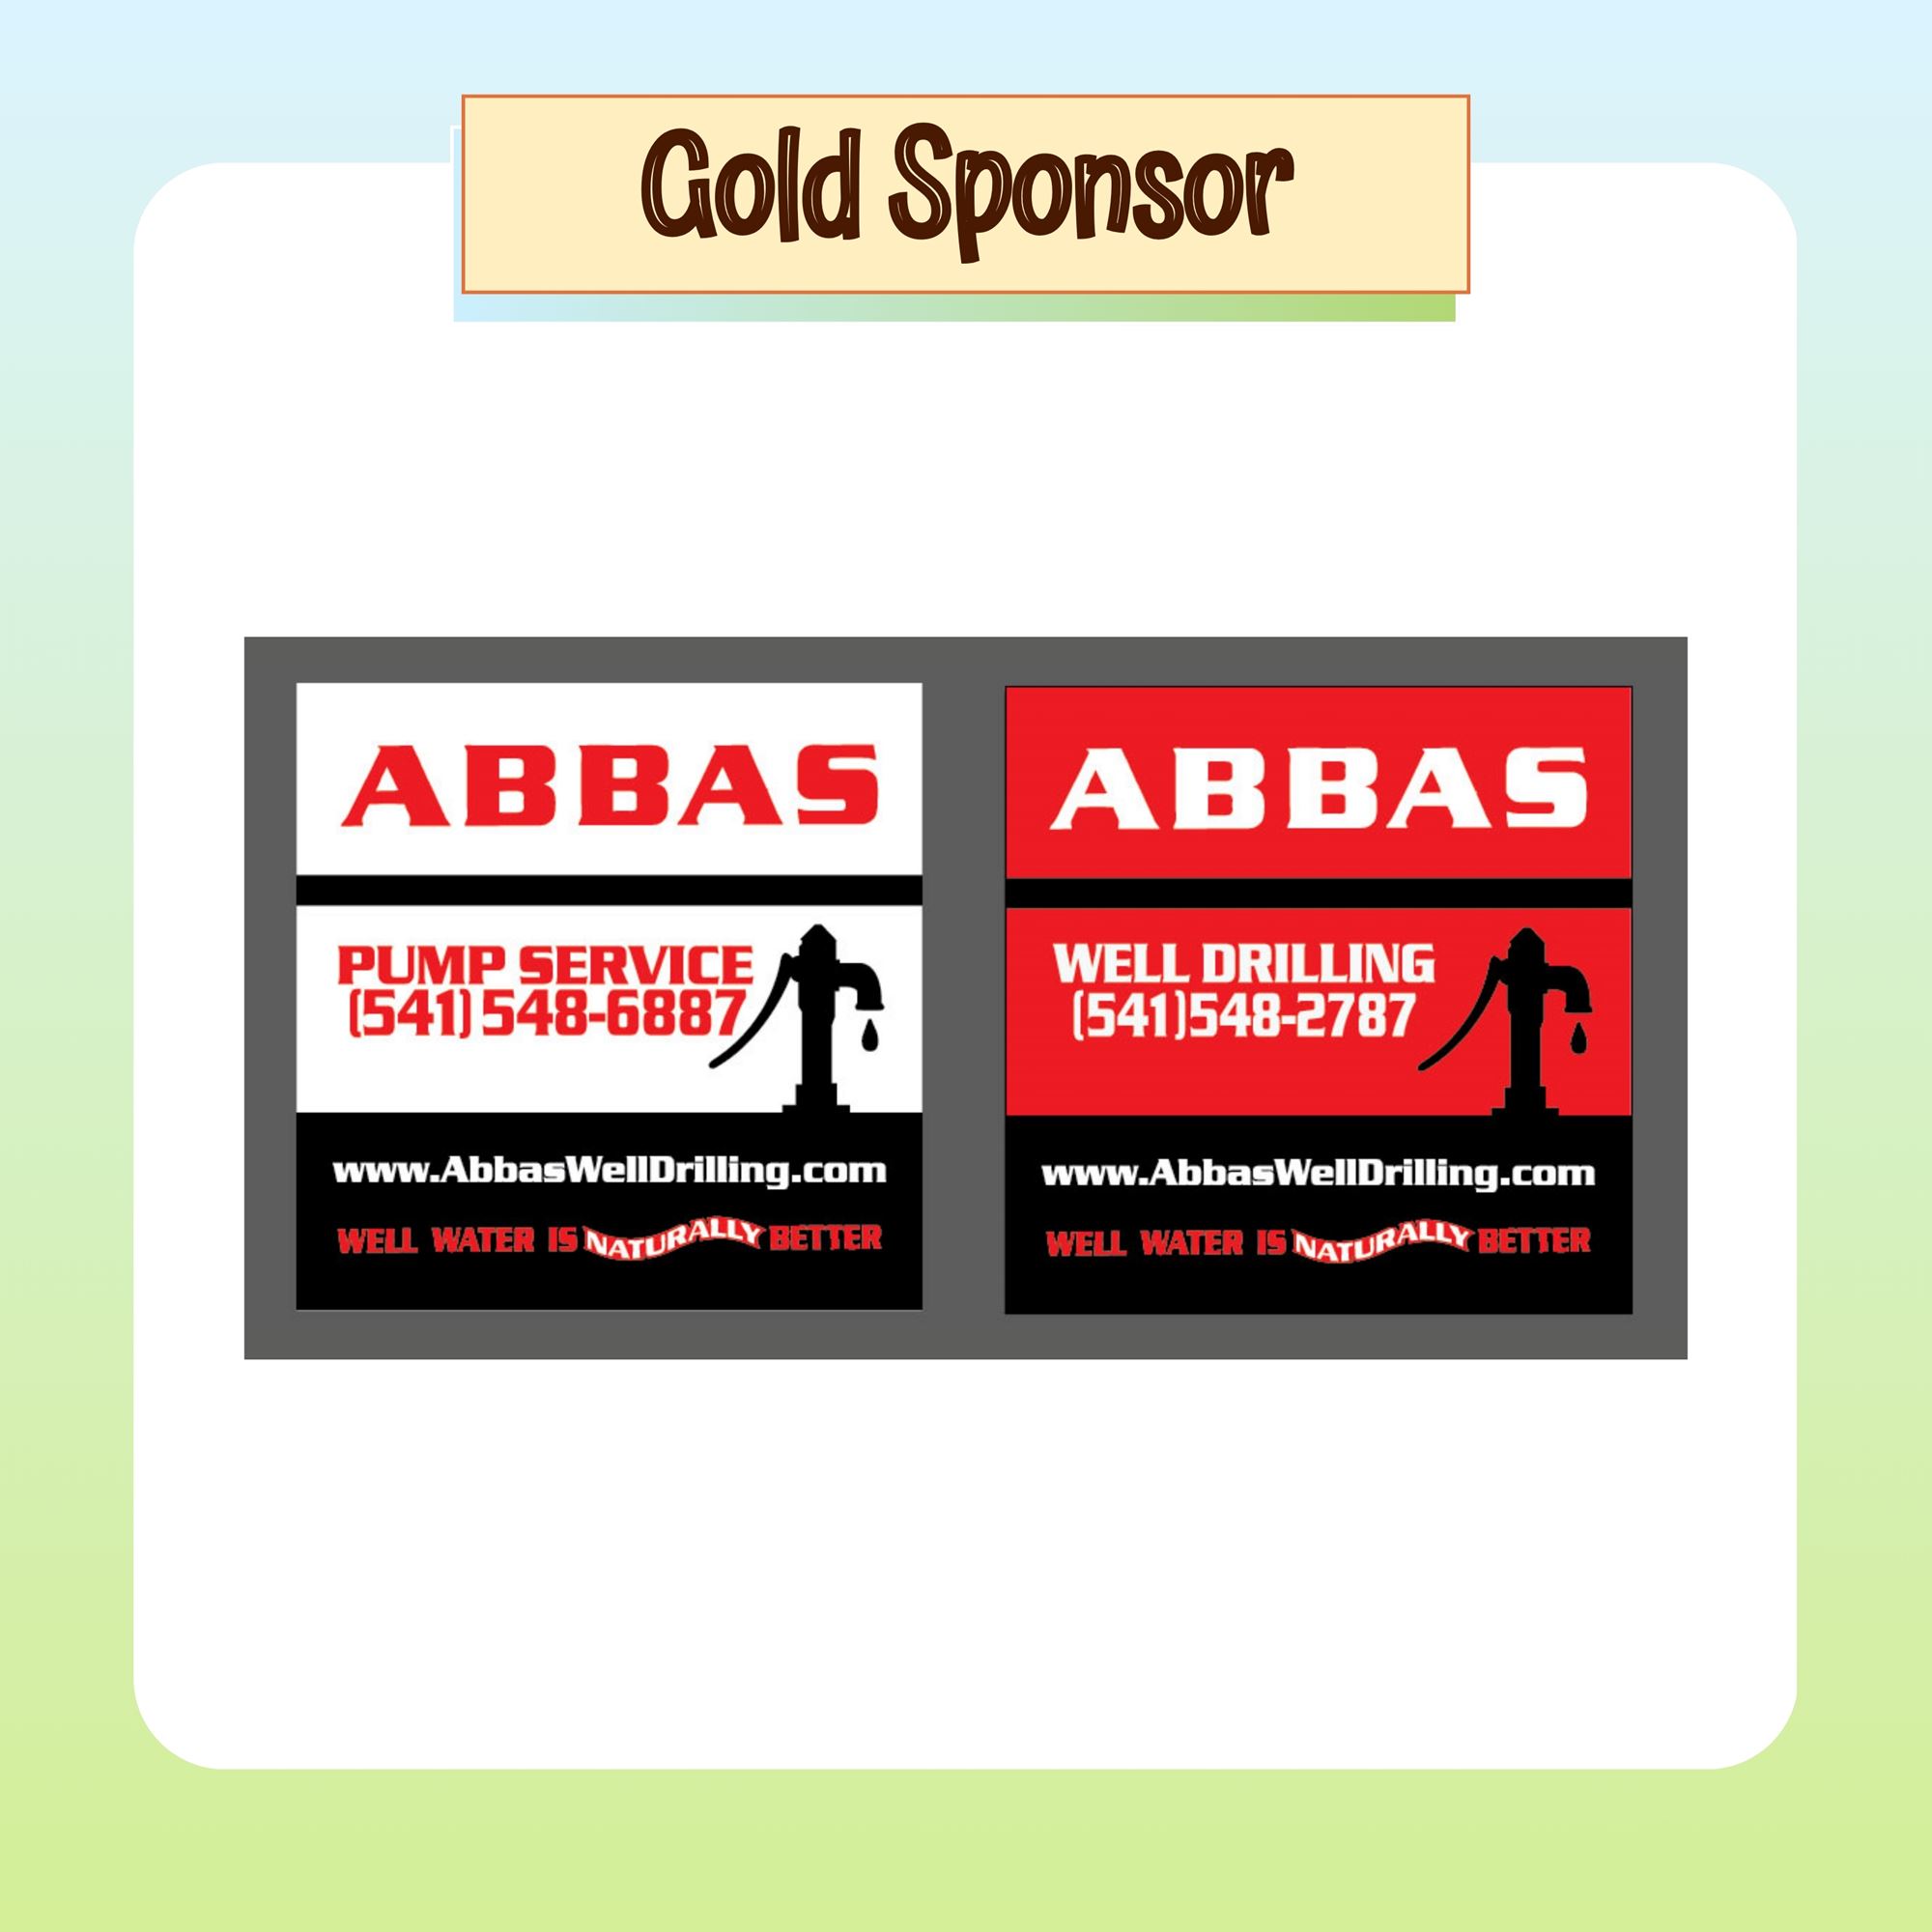 Gold Sponsor: Abbas Well Drilling and Pump Service